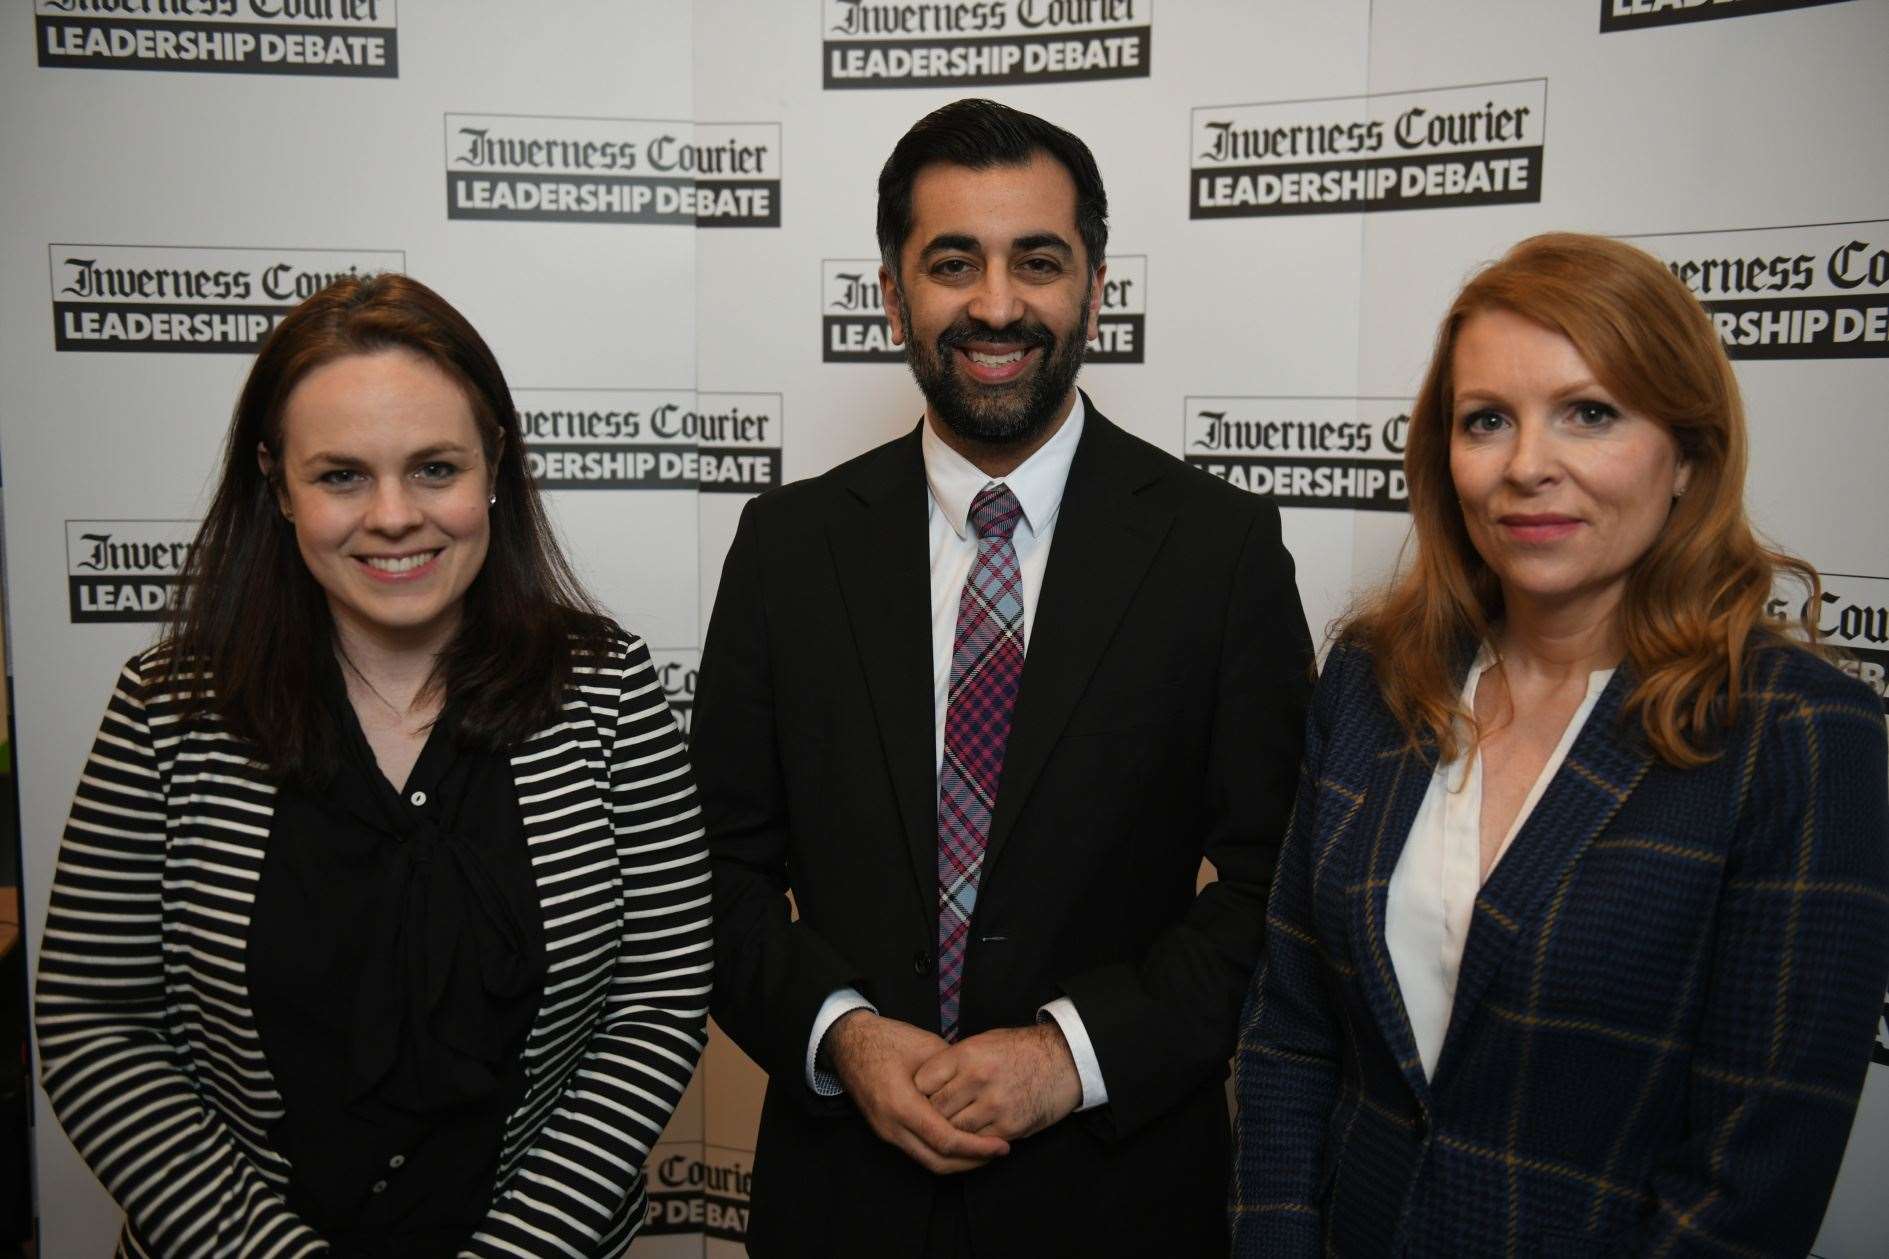 Kate Forbes, Humzah Yousaf and Ash Regan. Picture: James Mackenzie.